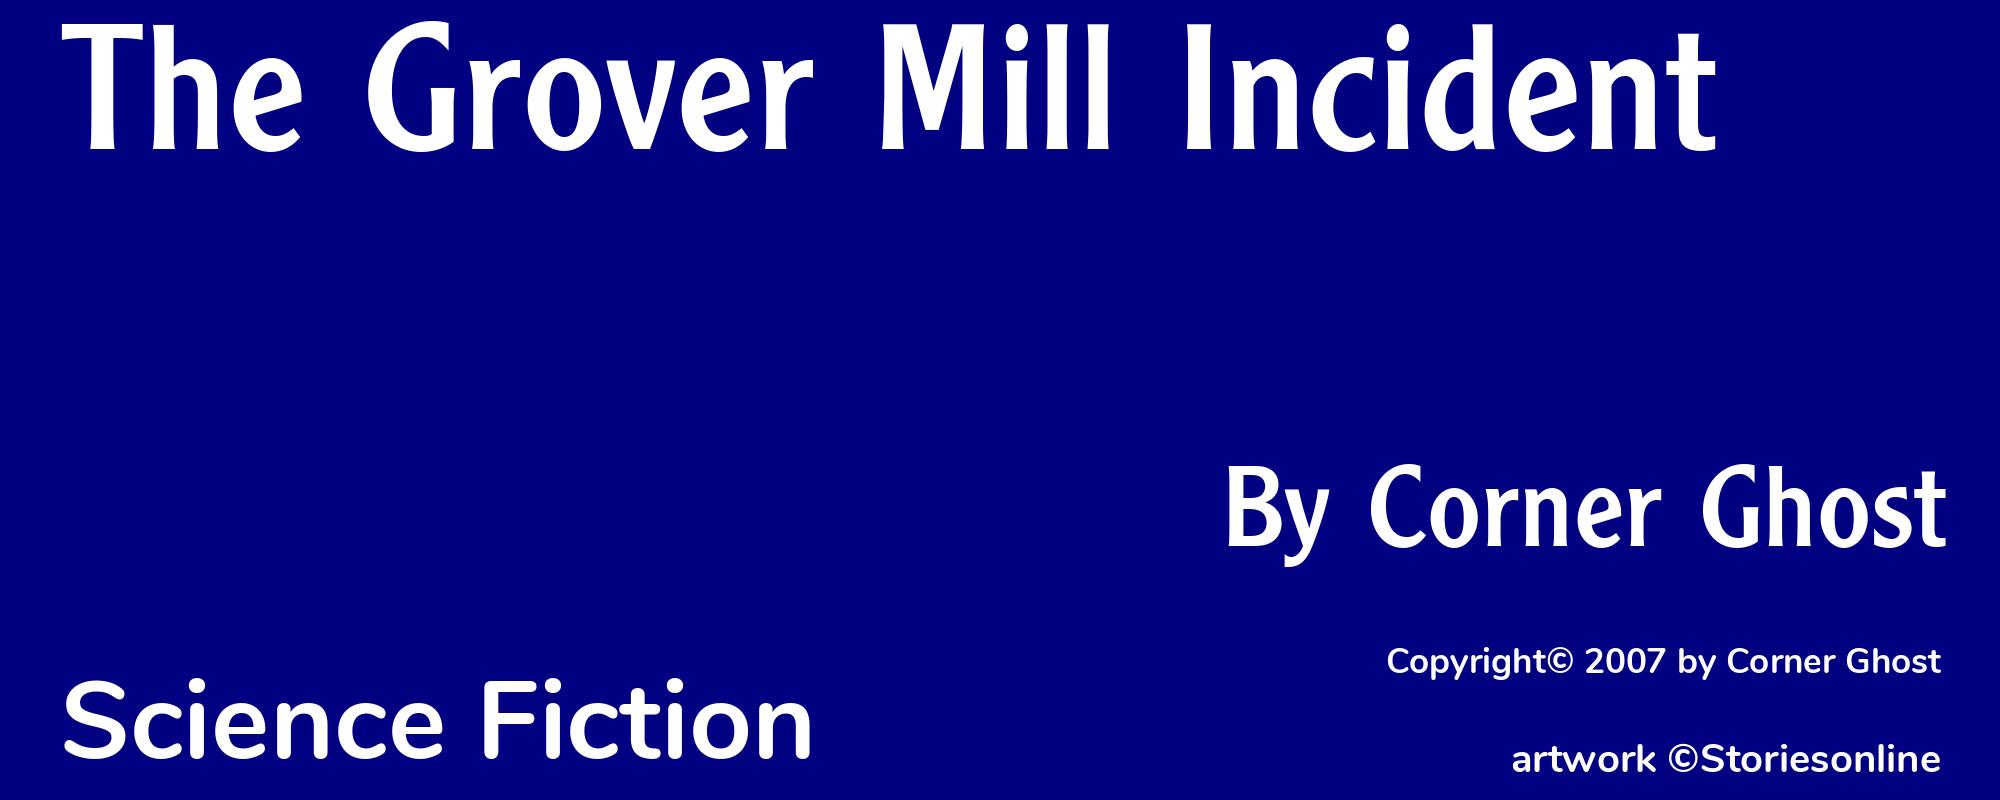 The Grover Mill Incident - Cover